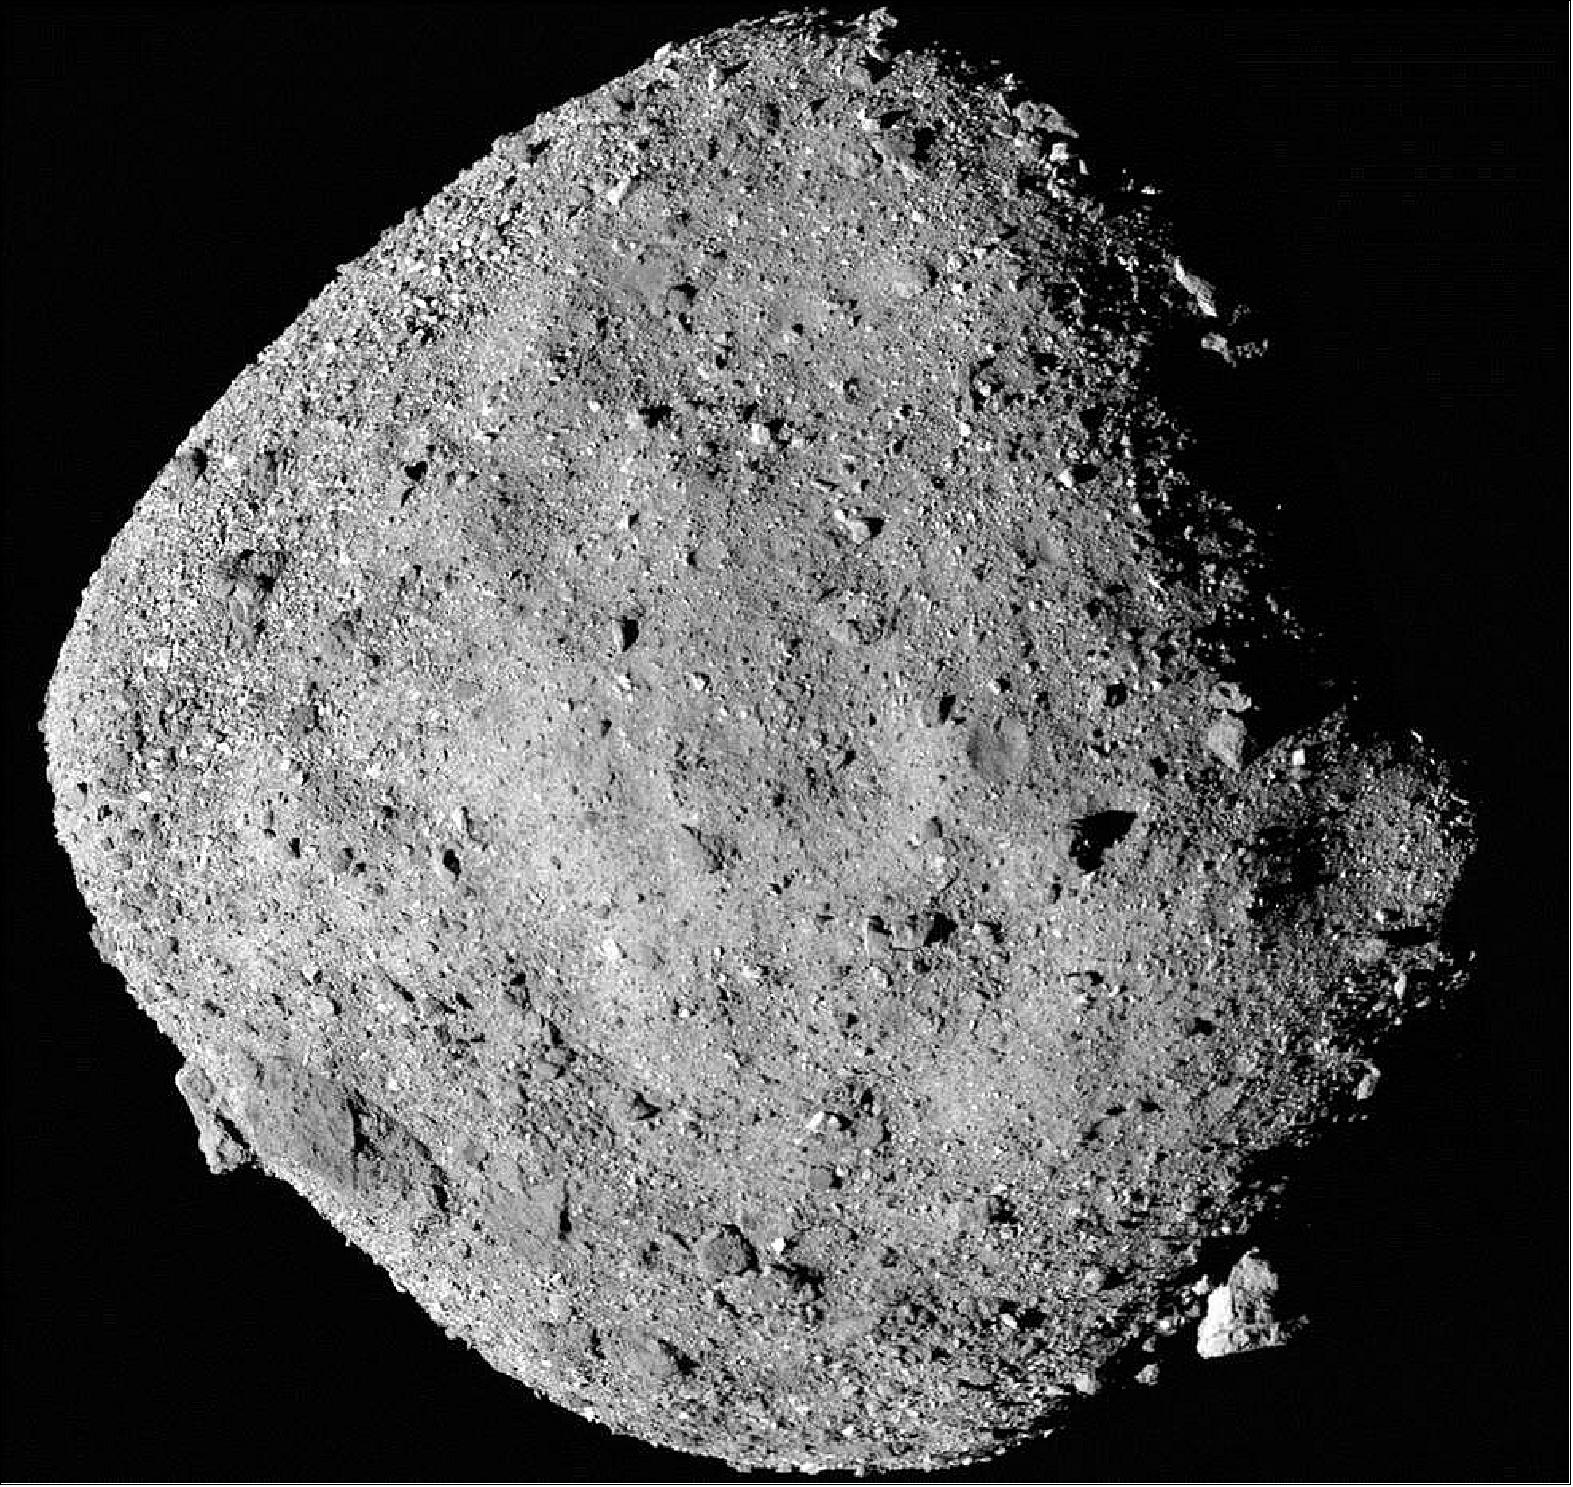 Figure 62: This mosaic image of asteroid Bennu is composed of 12 PolyCam images collected on 2 December by the OSIRIS-REx spacecraft from a range of 24 km (image credit: NASA/Goddard/University of Arizona)